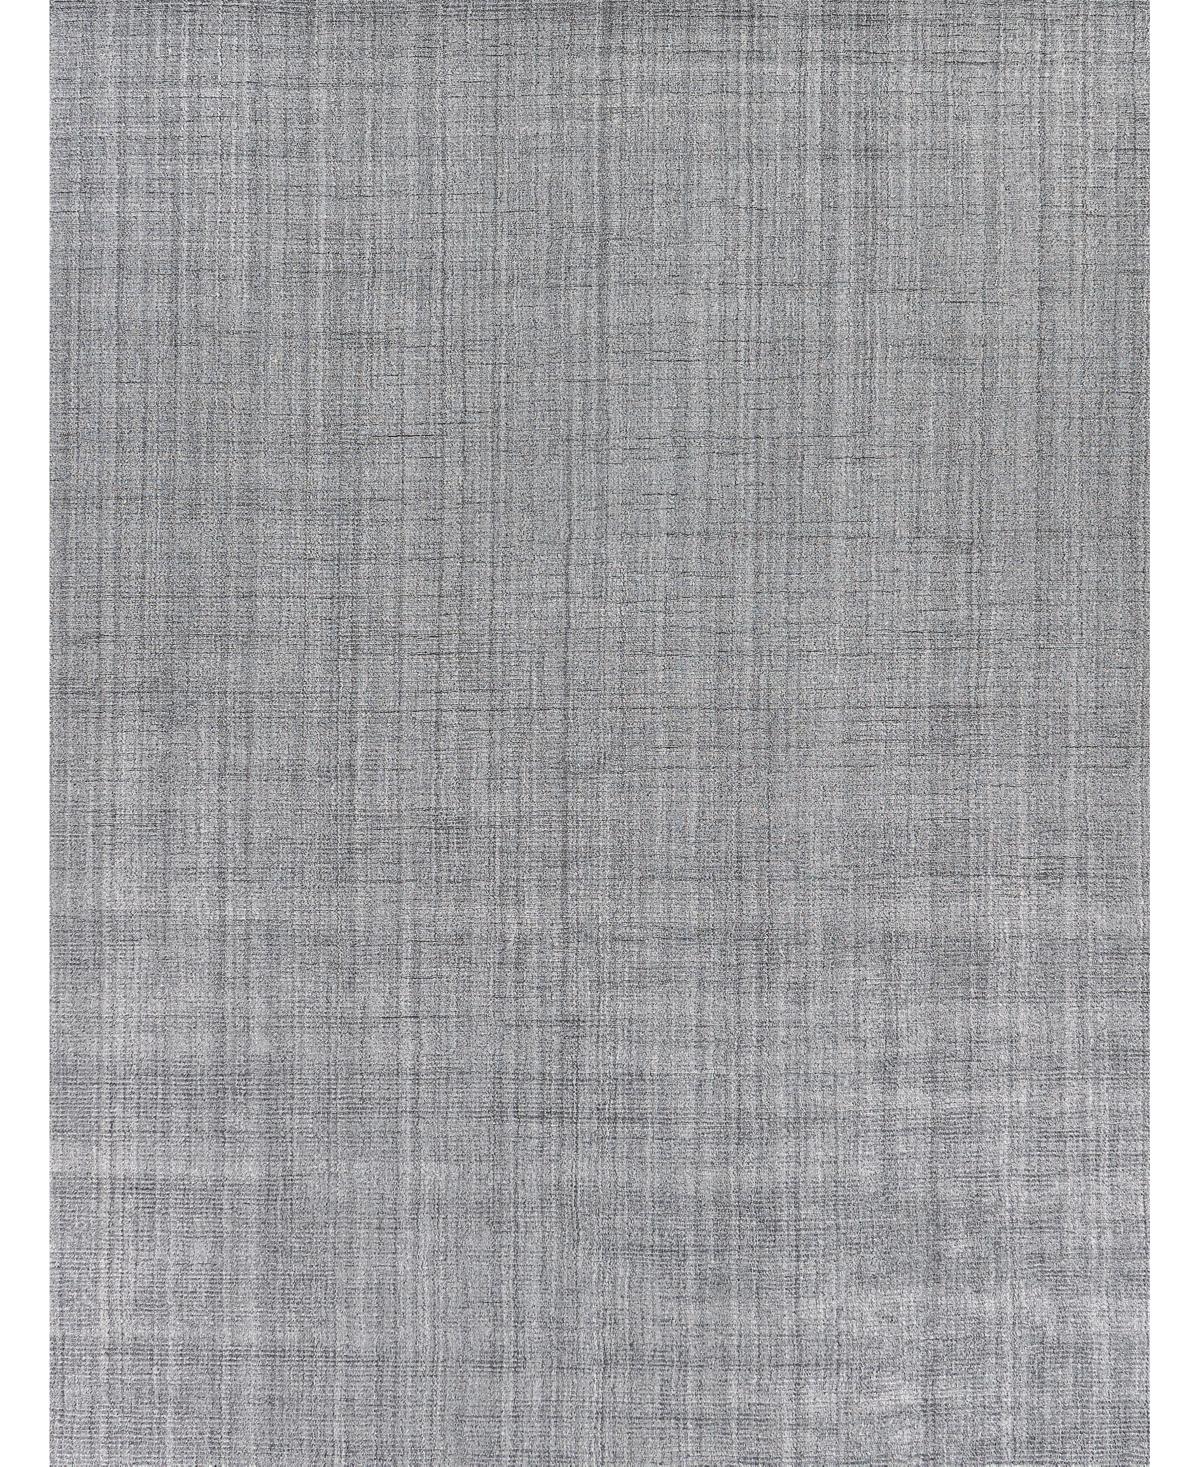 EXQUISITE RUGS ROBIN ER3780 6' X 9' AREA RUG